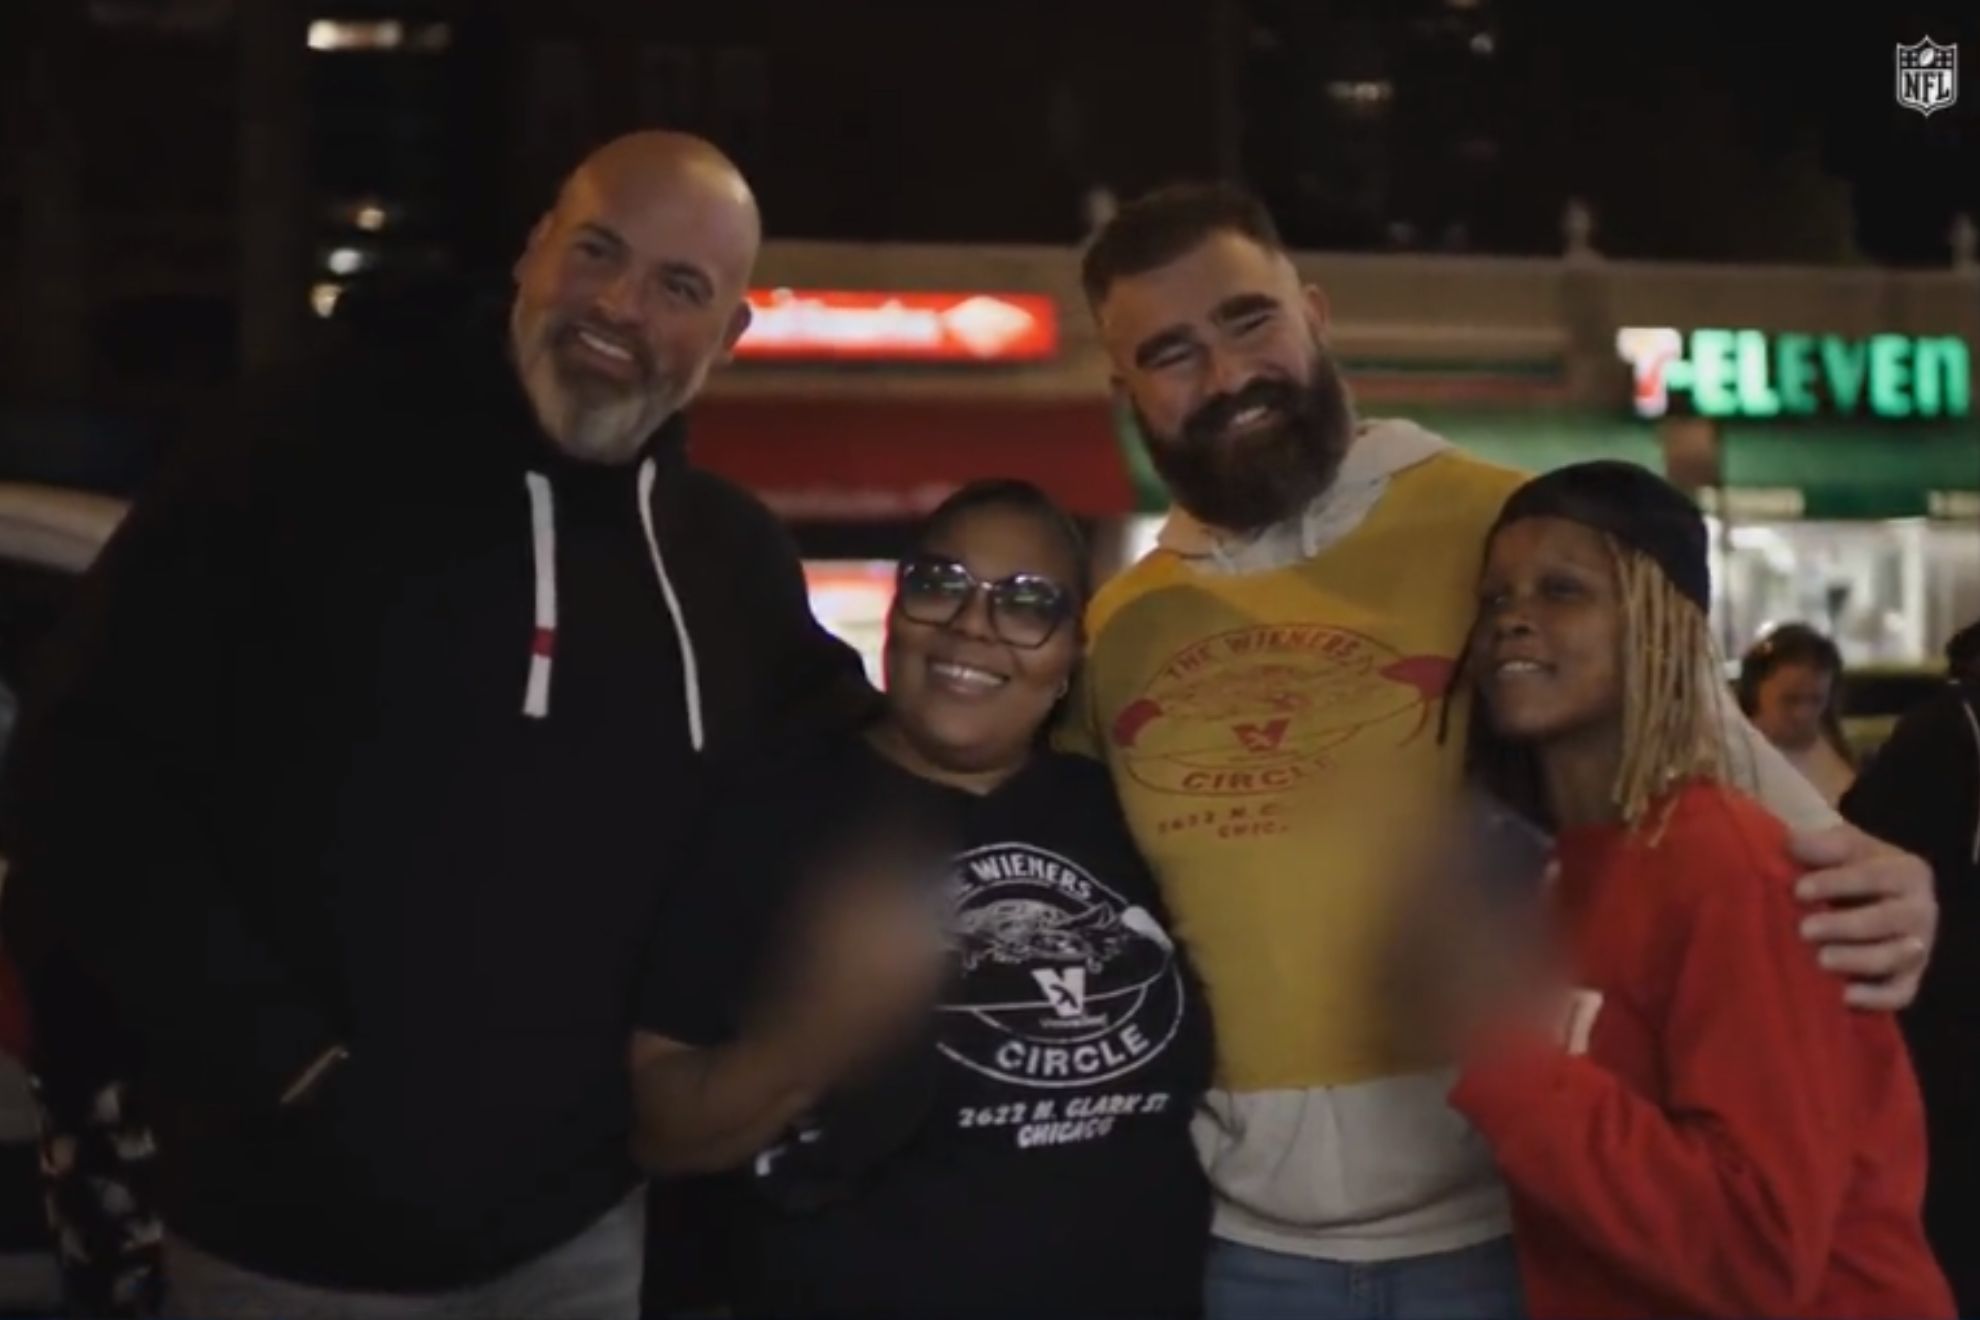 Jason Kelce trolls Wiener's Circle staff member, who claps back with hilarious insult